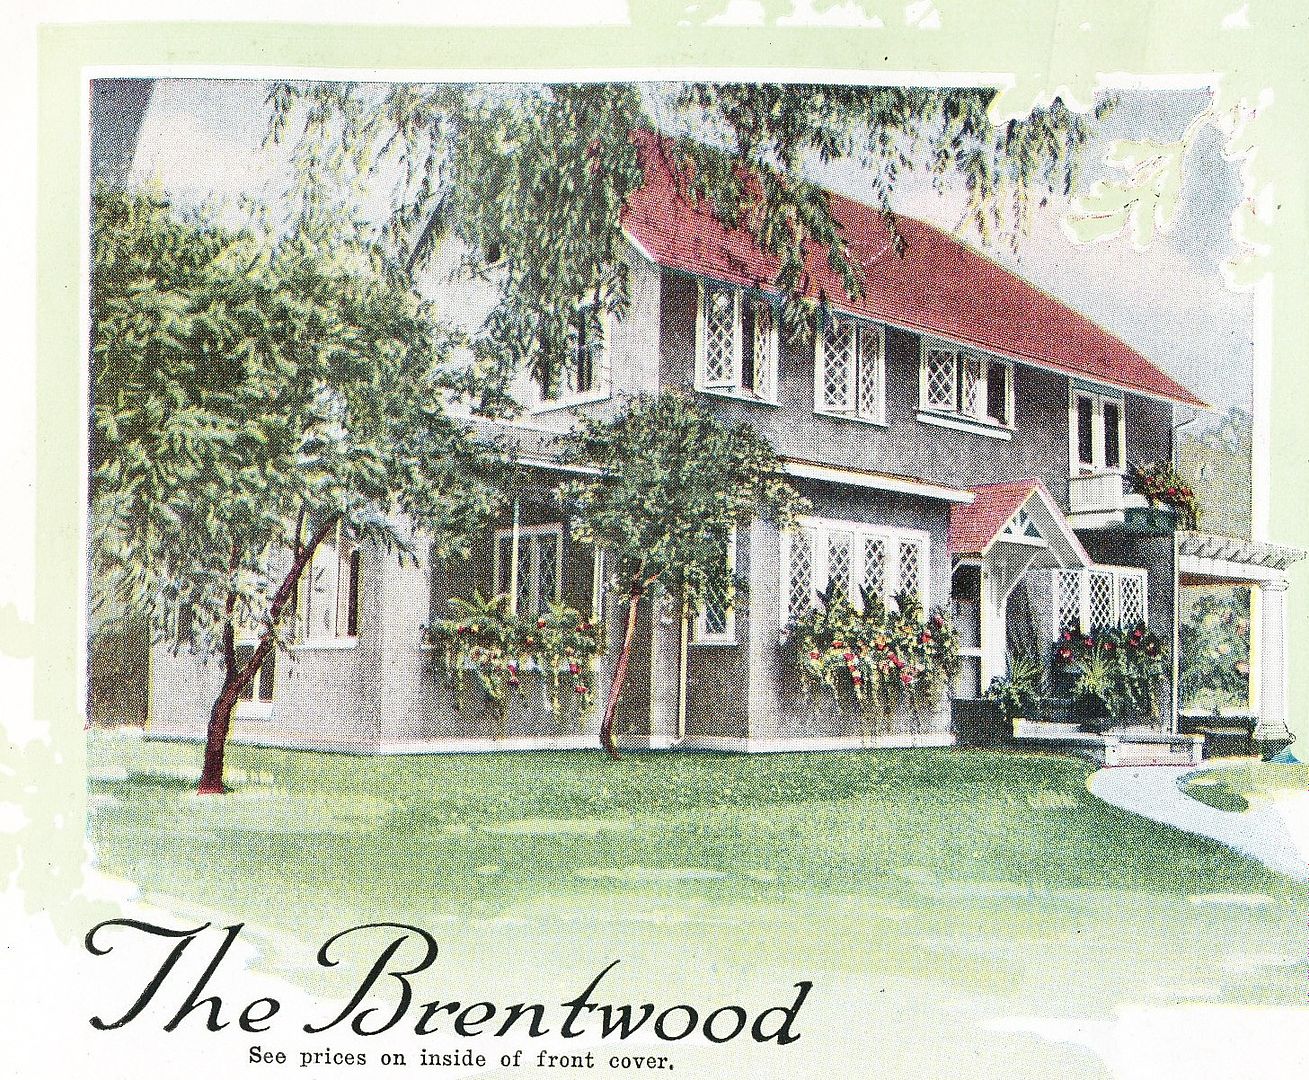 Whats not to love? The Aladdin Brentwood as seen in the 1919 catalog. What a house!